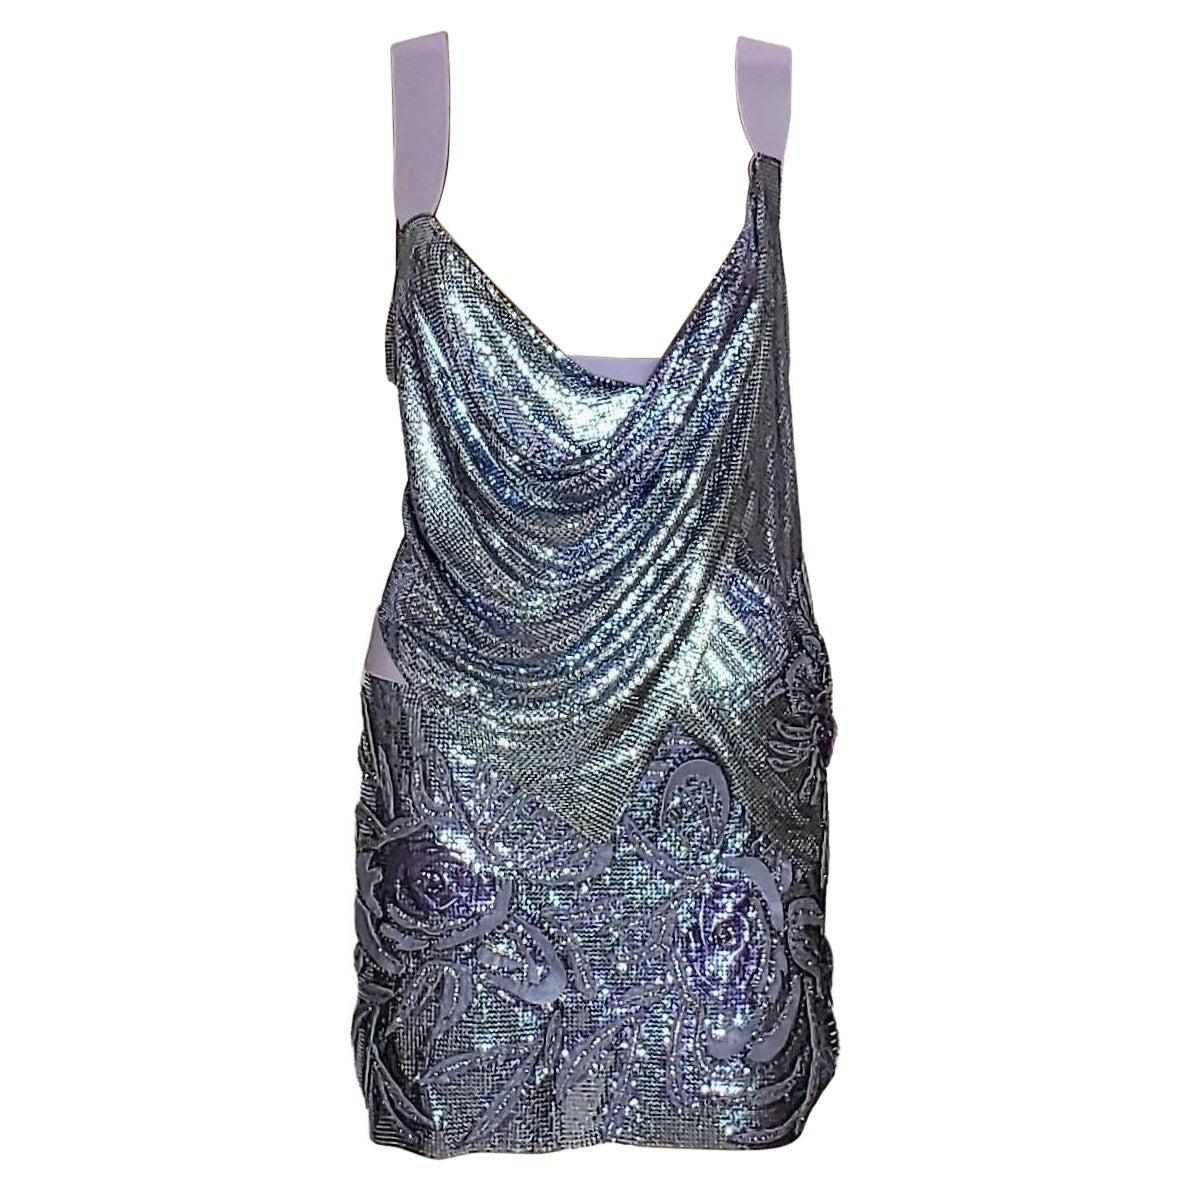 S/S 14 L#42 VERSACE METAL MESH CRYSTAL EMBELLISHED TOP and SKIRT SET SZ IT 38-2 For Sale